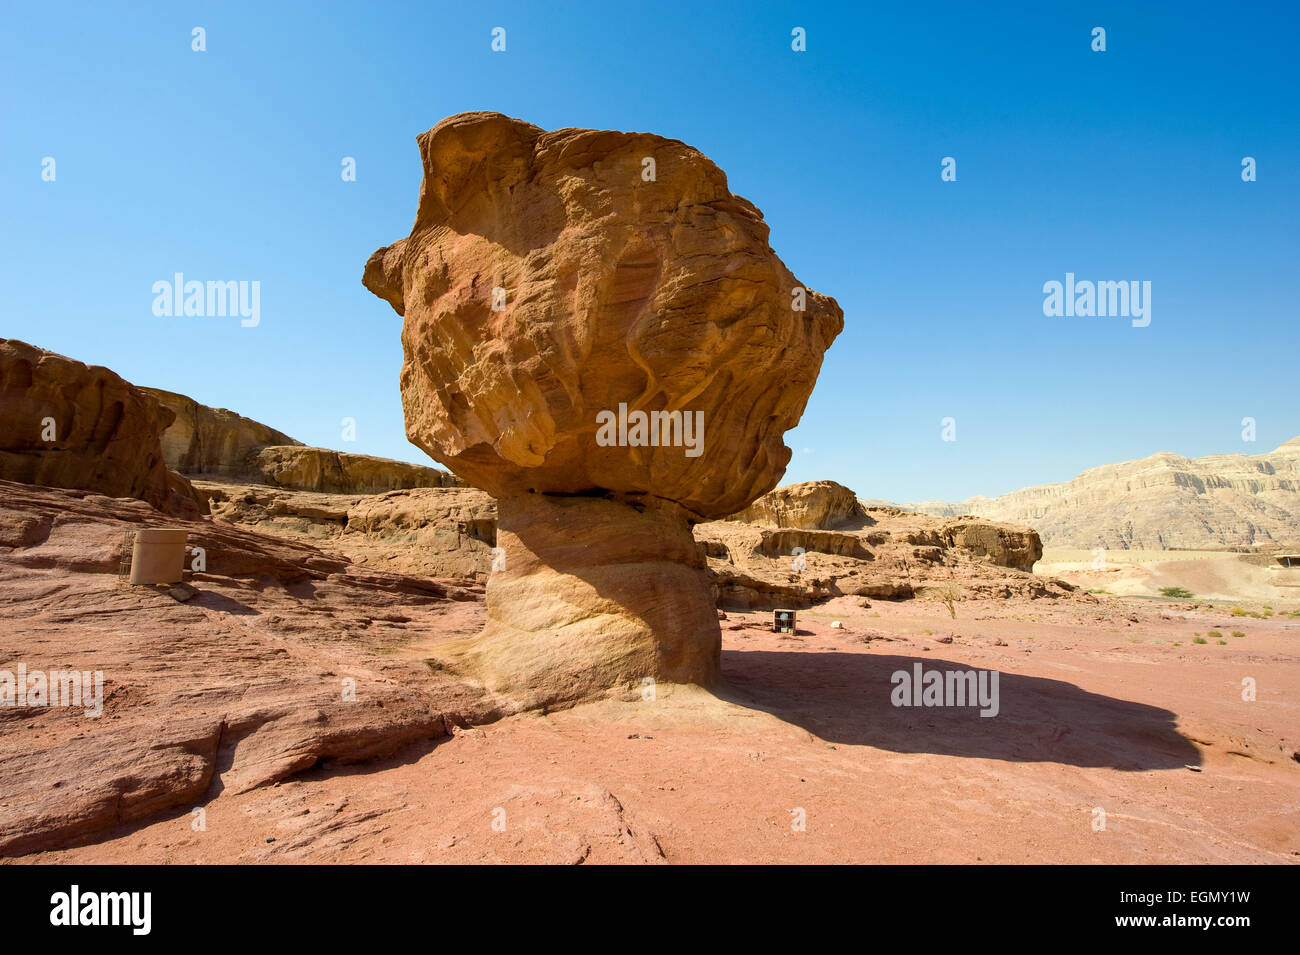 'The Mushroom' rock formation at Timna Park in the southern negev desert in Israel Stock Photo